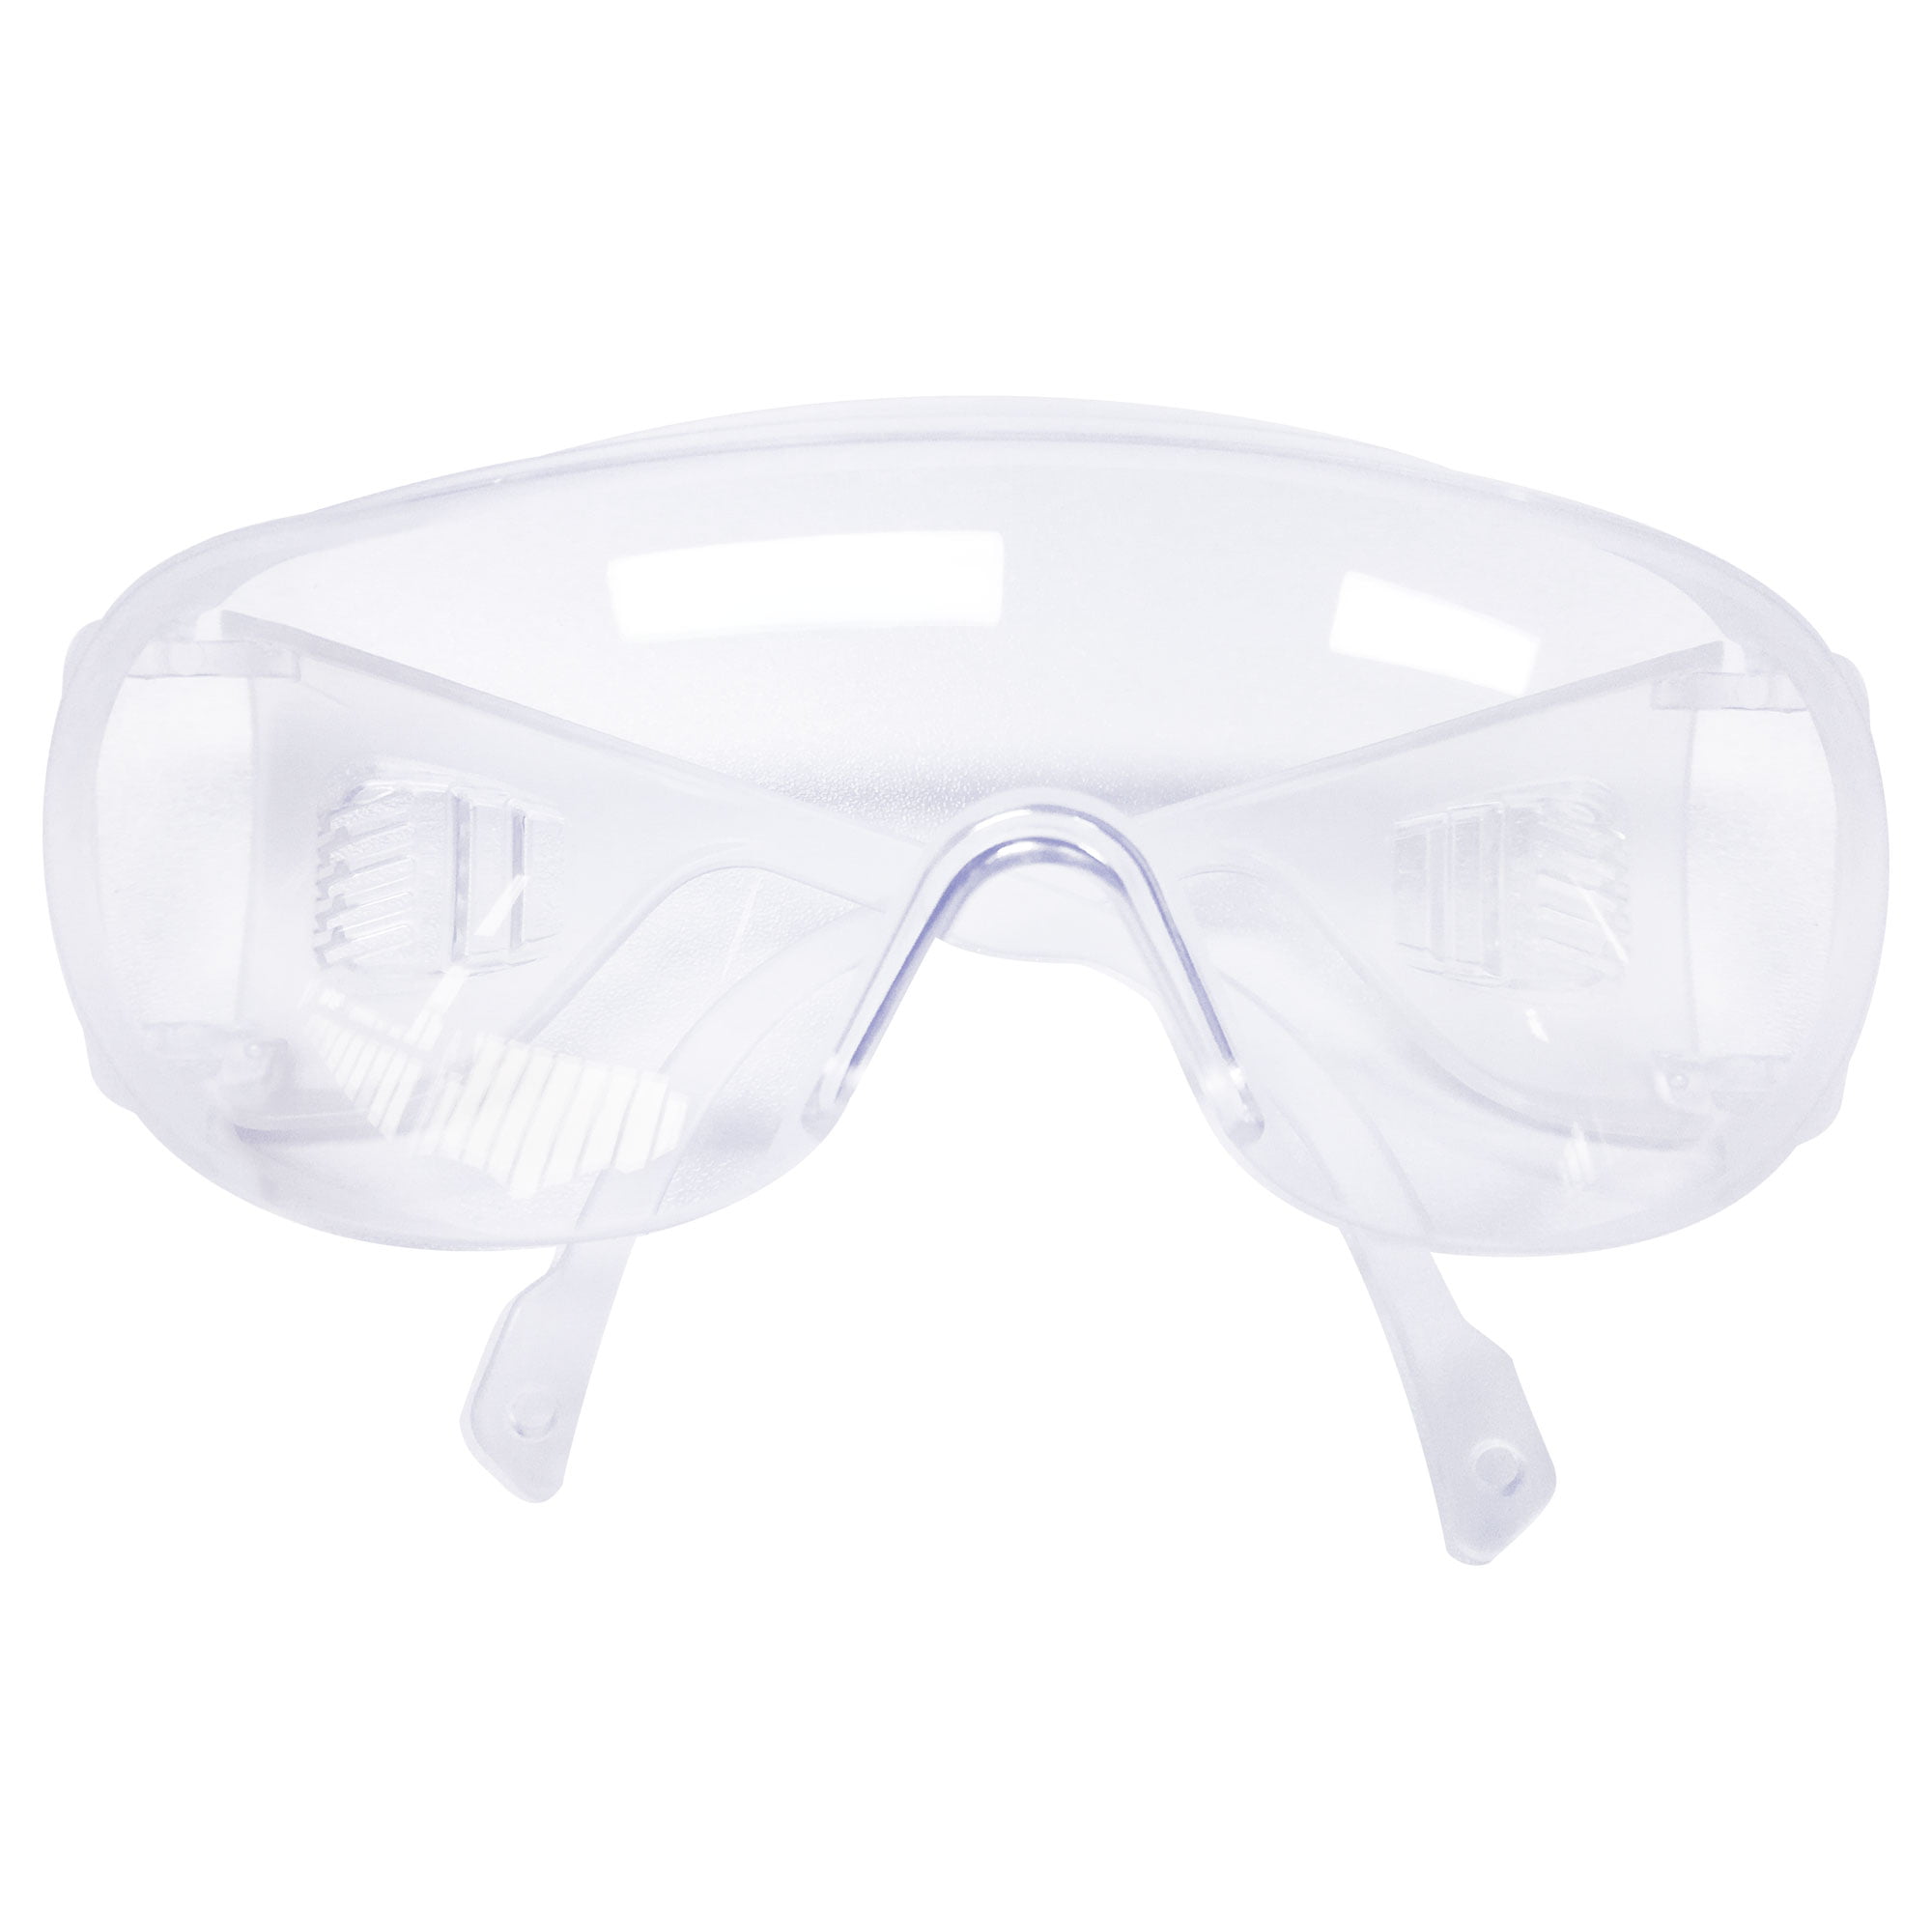 Clear Lens Protective Safety Glasses Eye Protection Goggles Lab Work Specs new